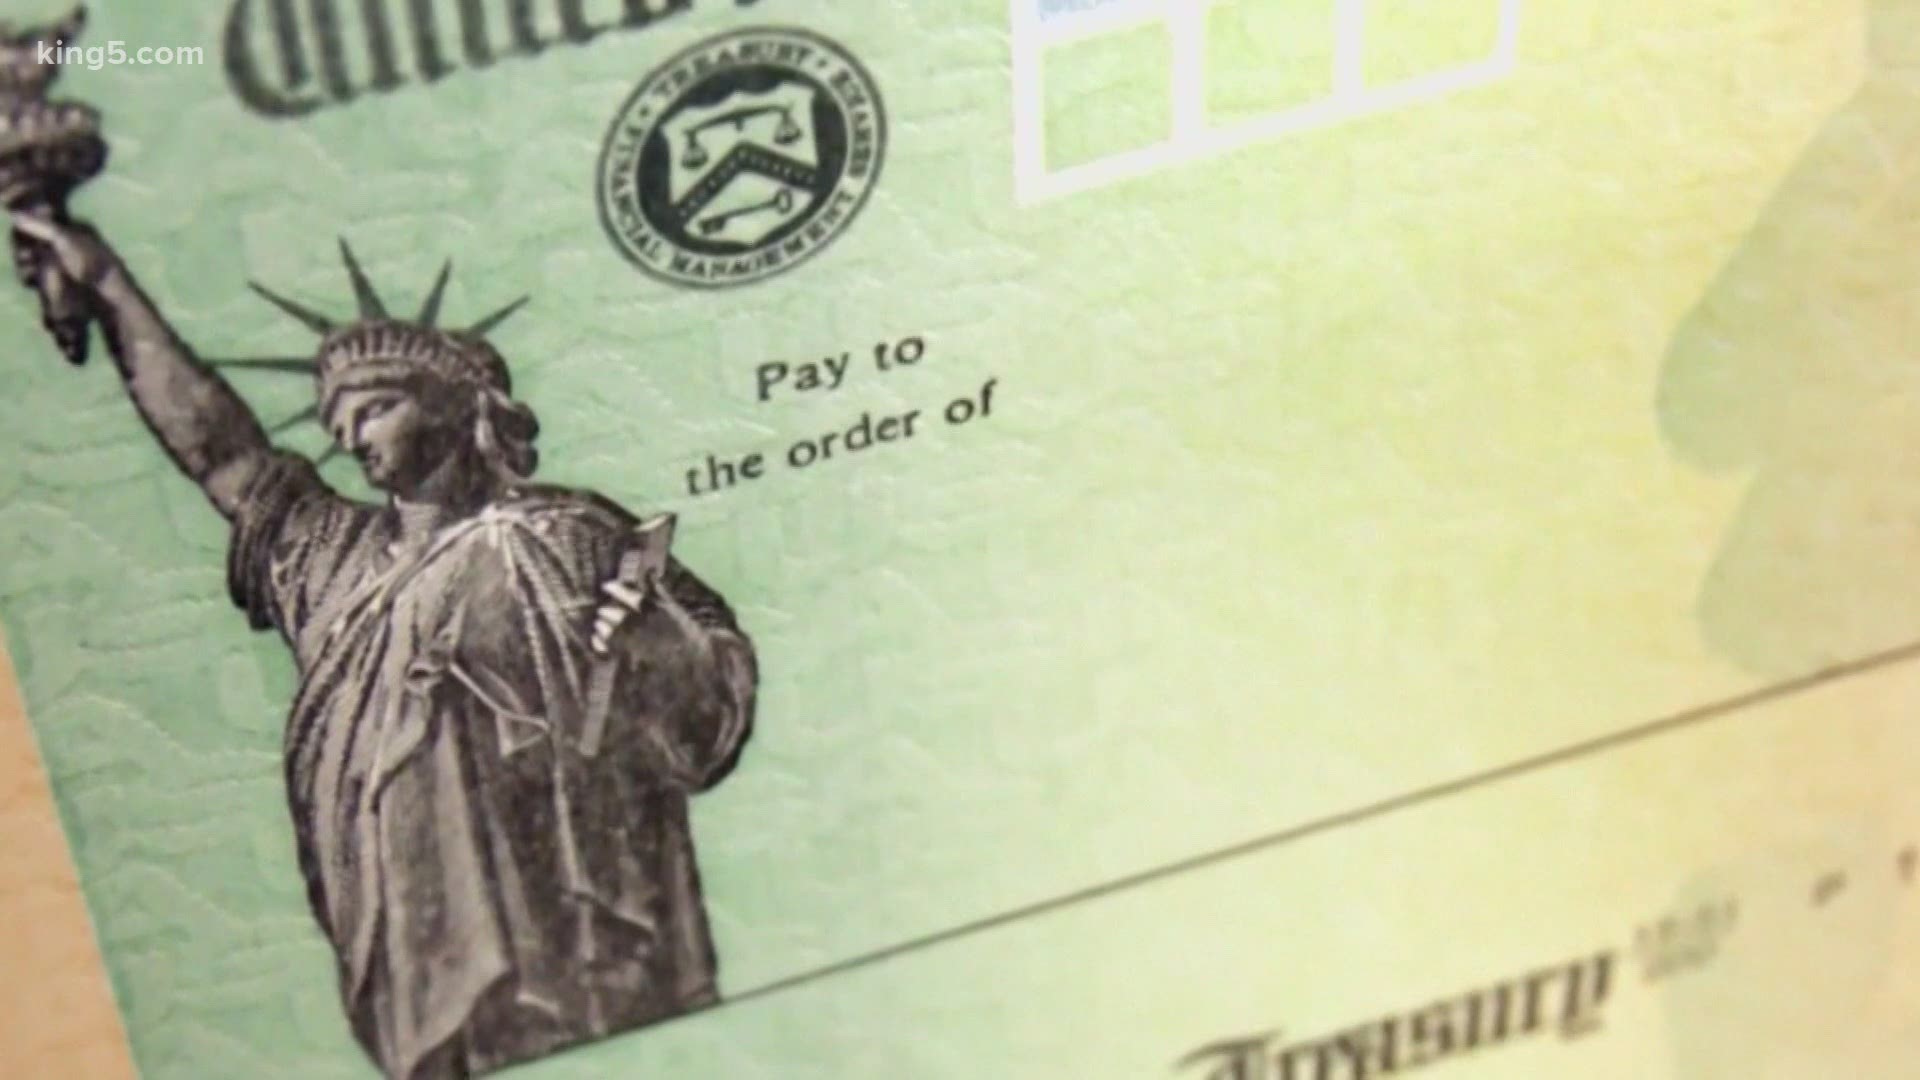 While many have seen the $600 checks deposited already, others are wondering if they need to claim a credit on their taxes.